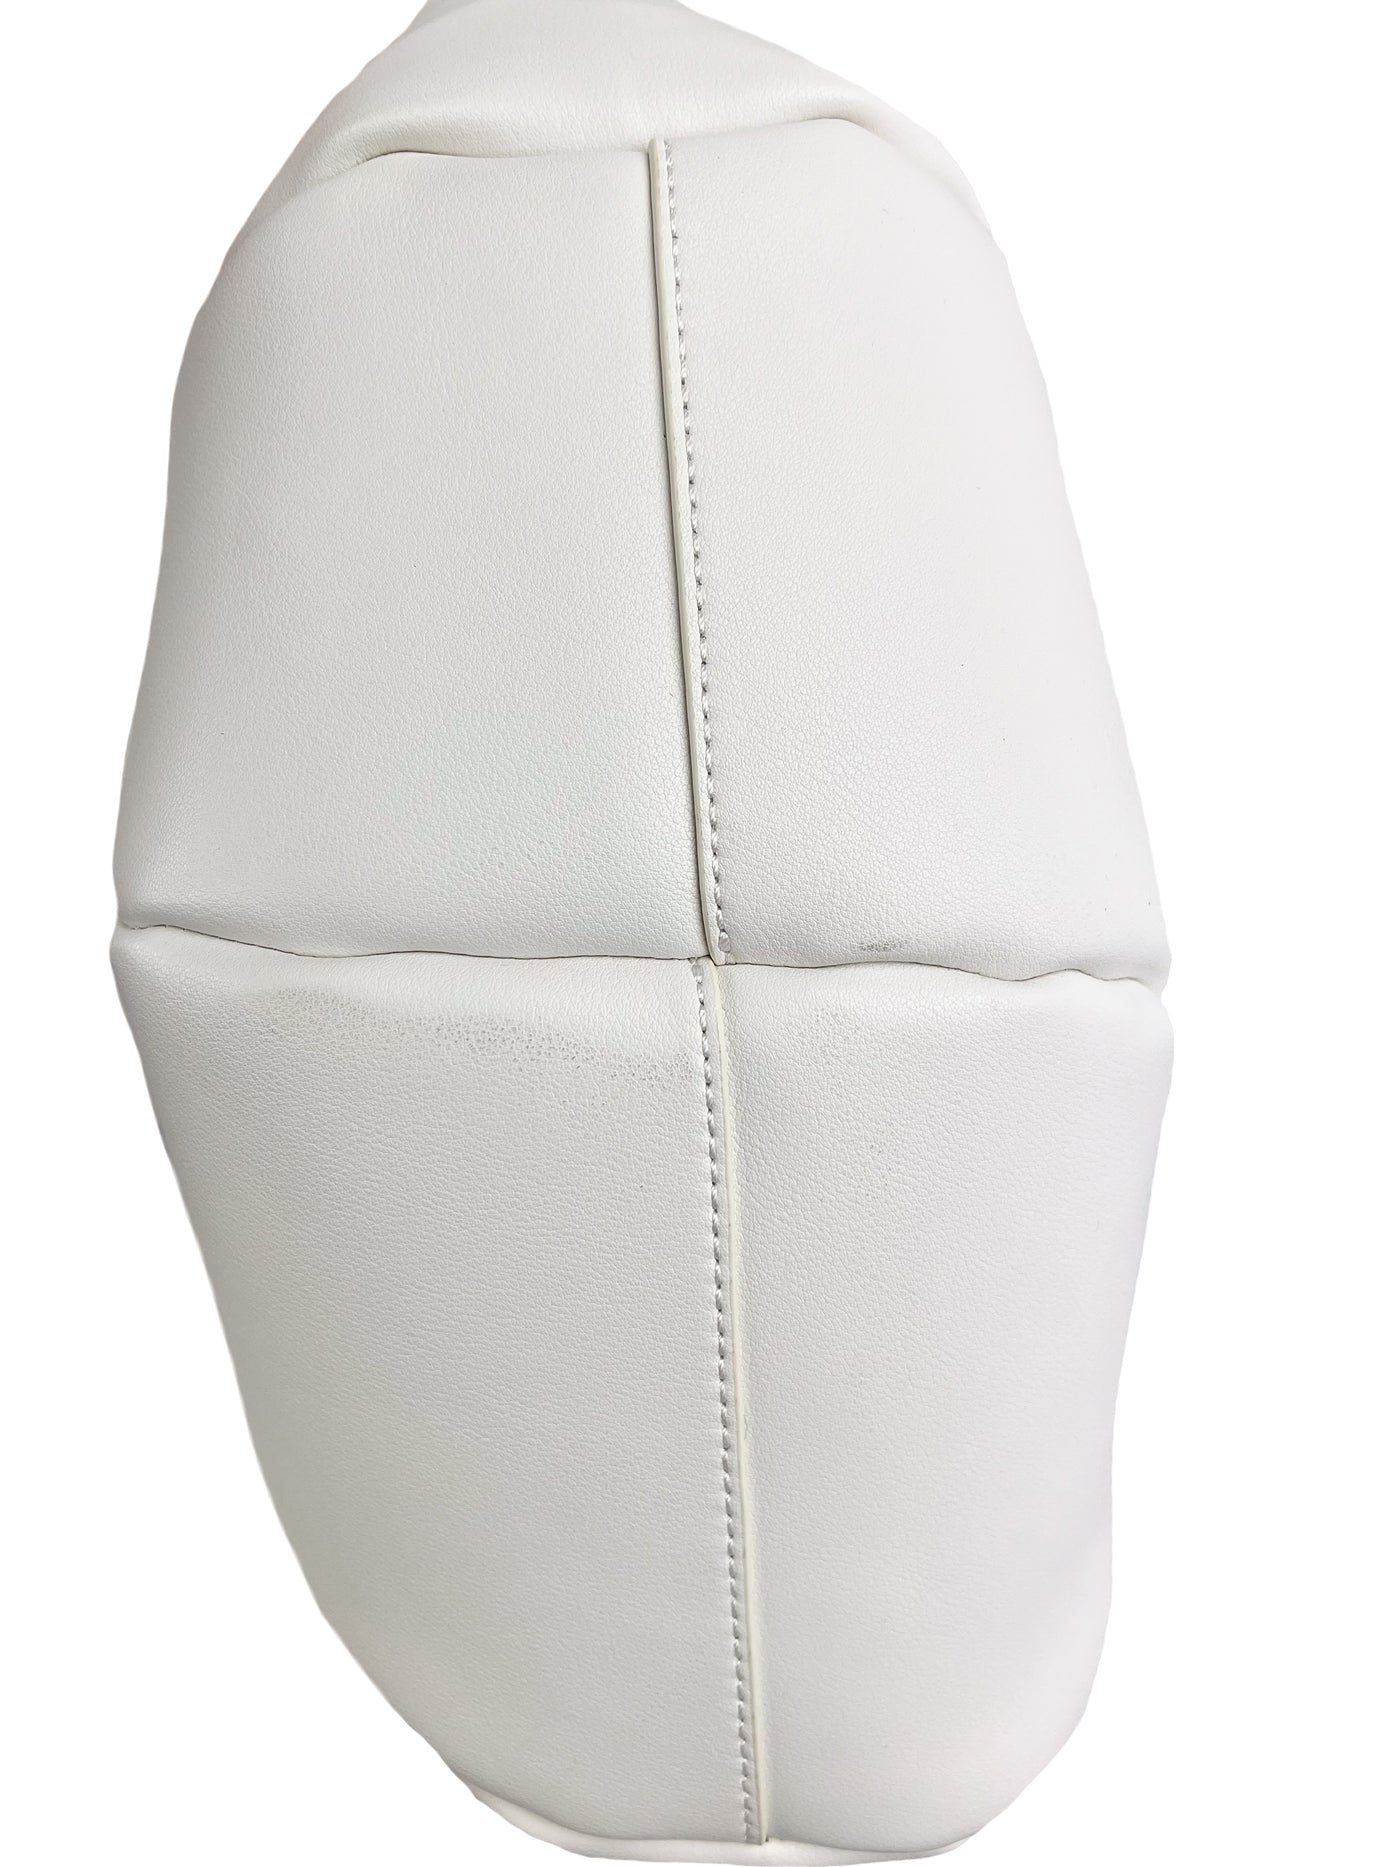 Exclusive Designer Twisted 208 Leather Handbag in White - Discounts on Exclusive Designer at UAL